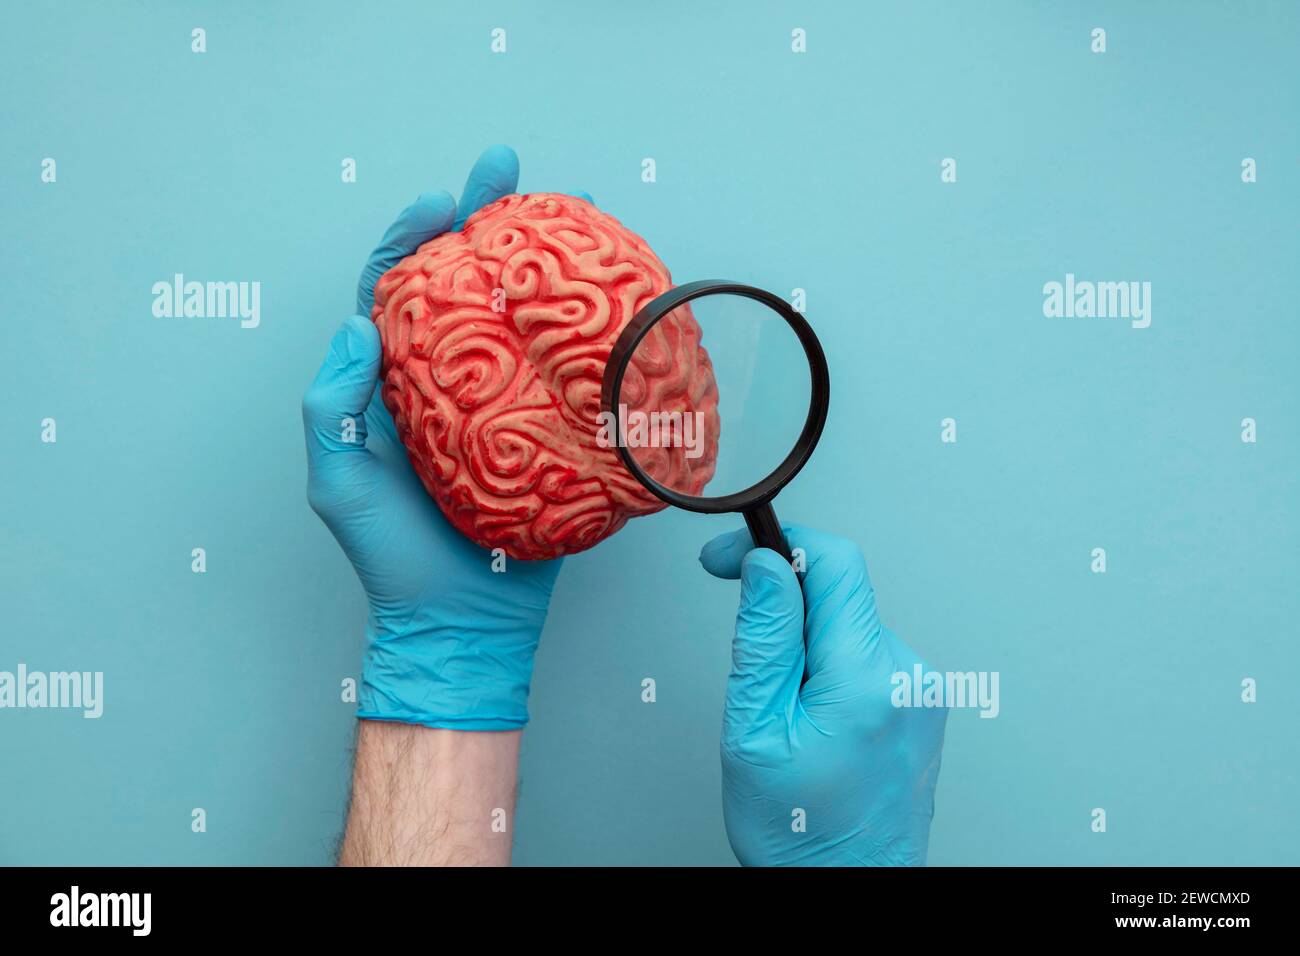 Doctor using a magnifying glass to look at a brain. Mental health concept Stock Photo